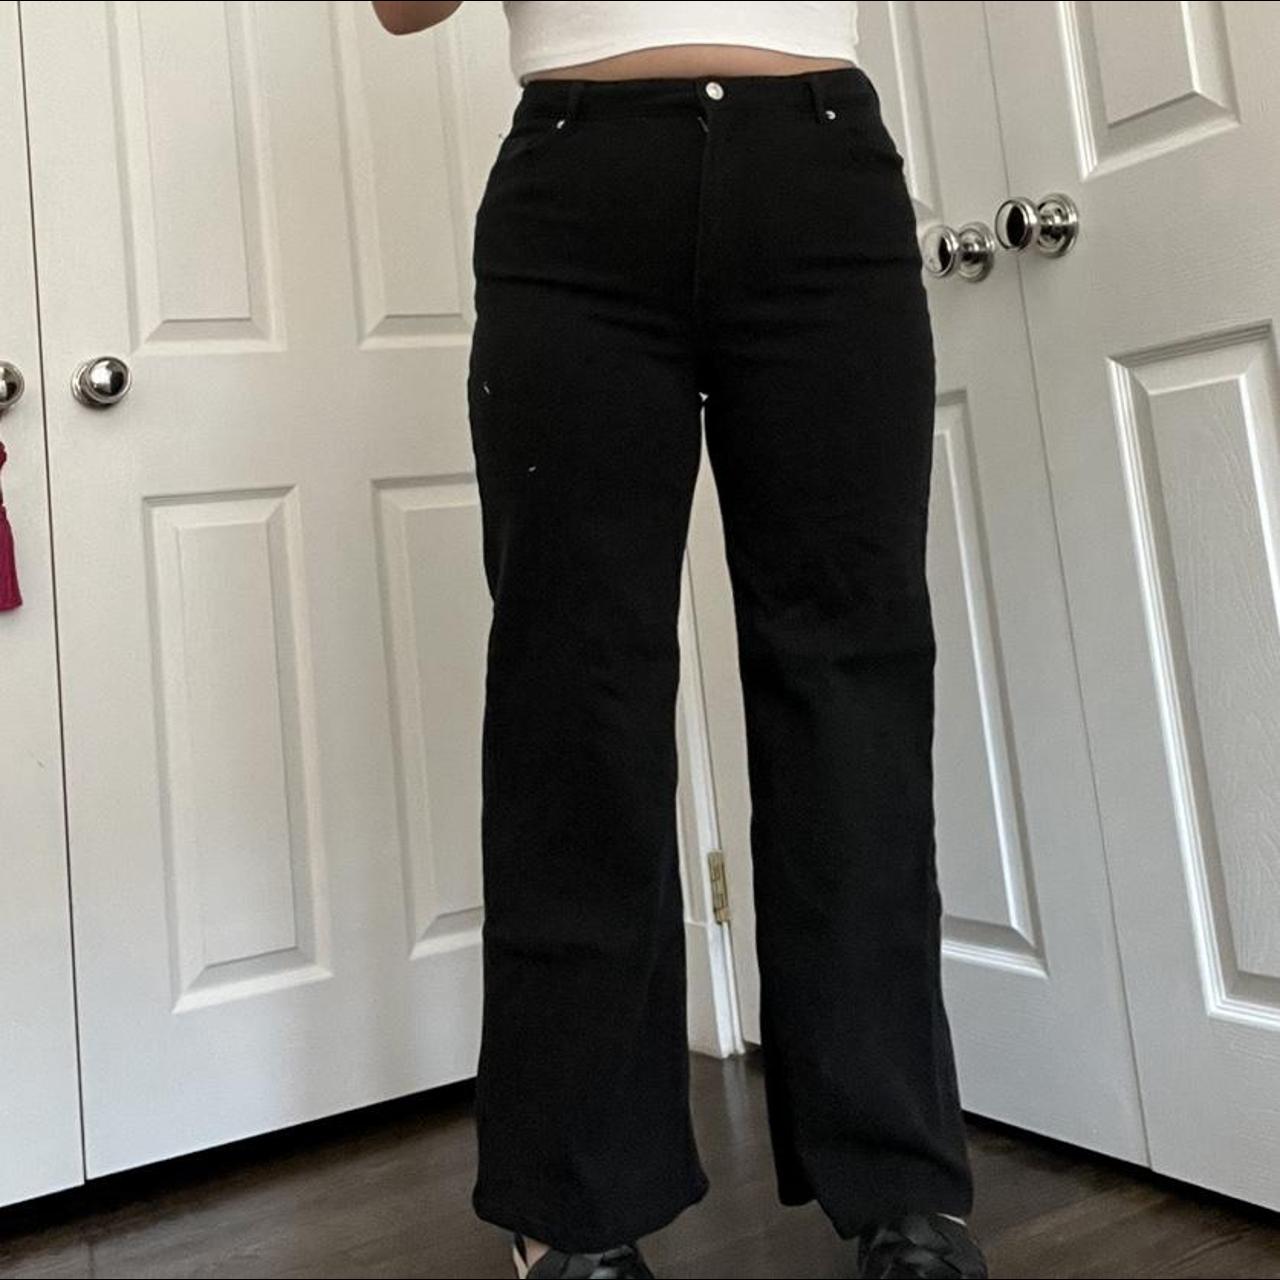 H&M wide leg twill pants size 14! These are my... - Depop